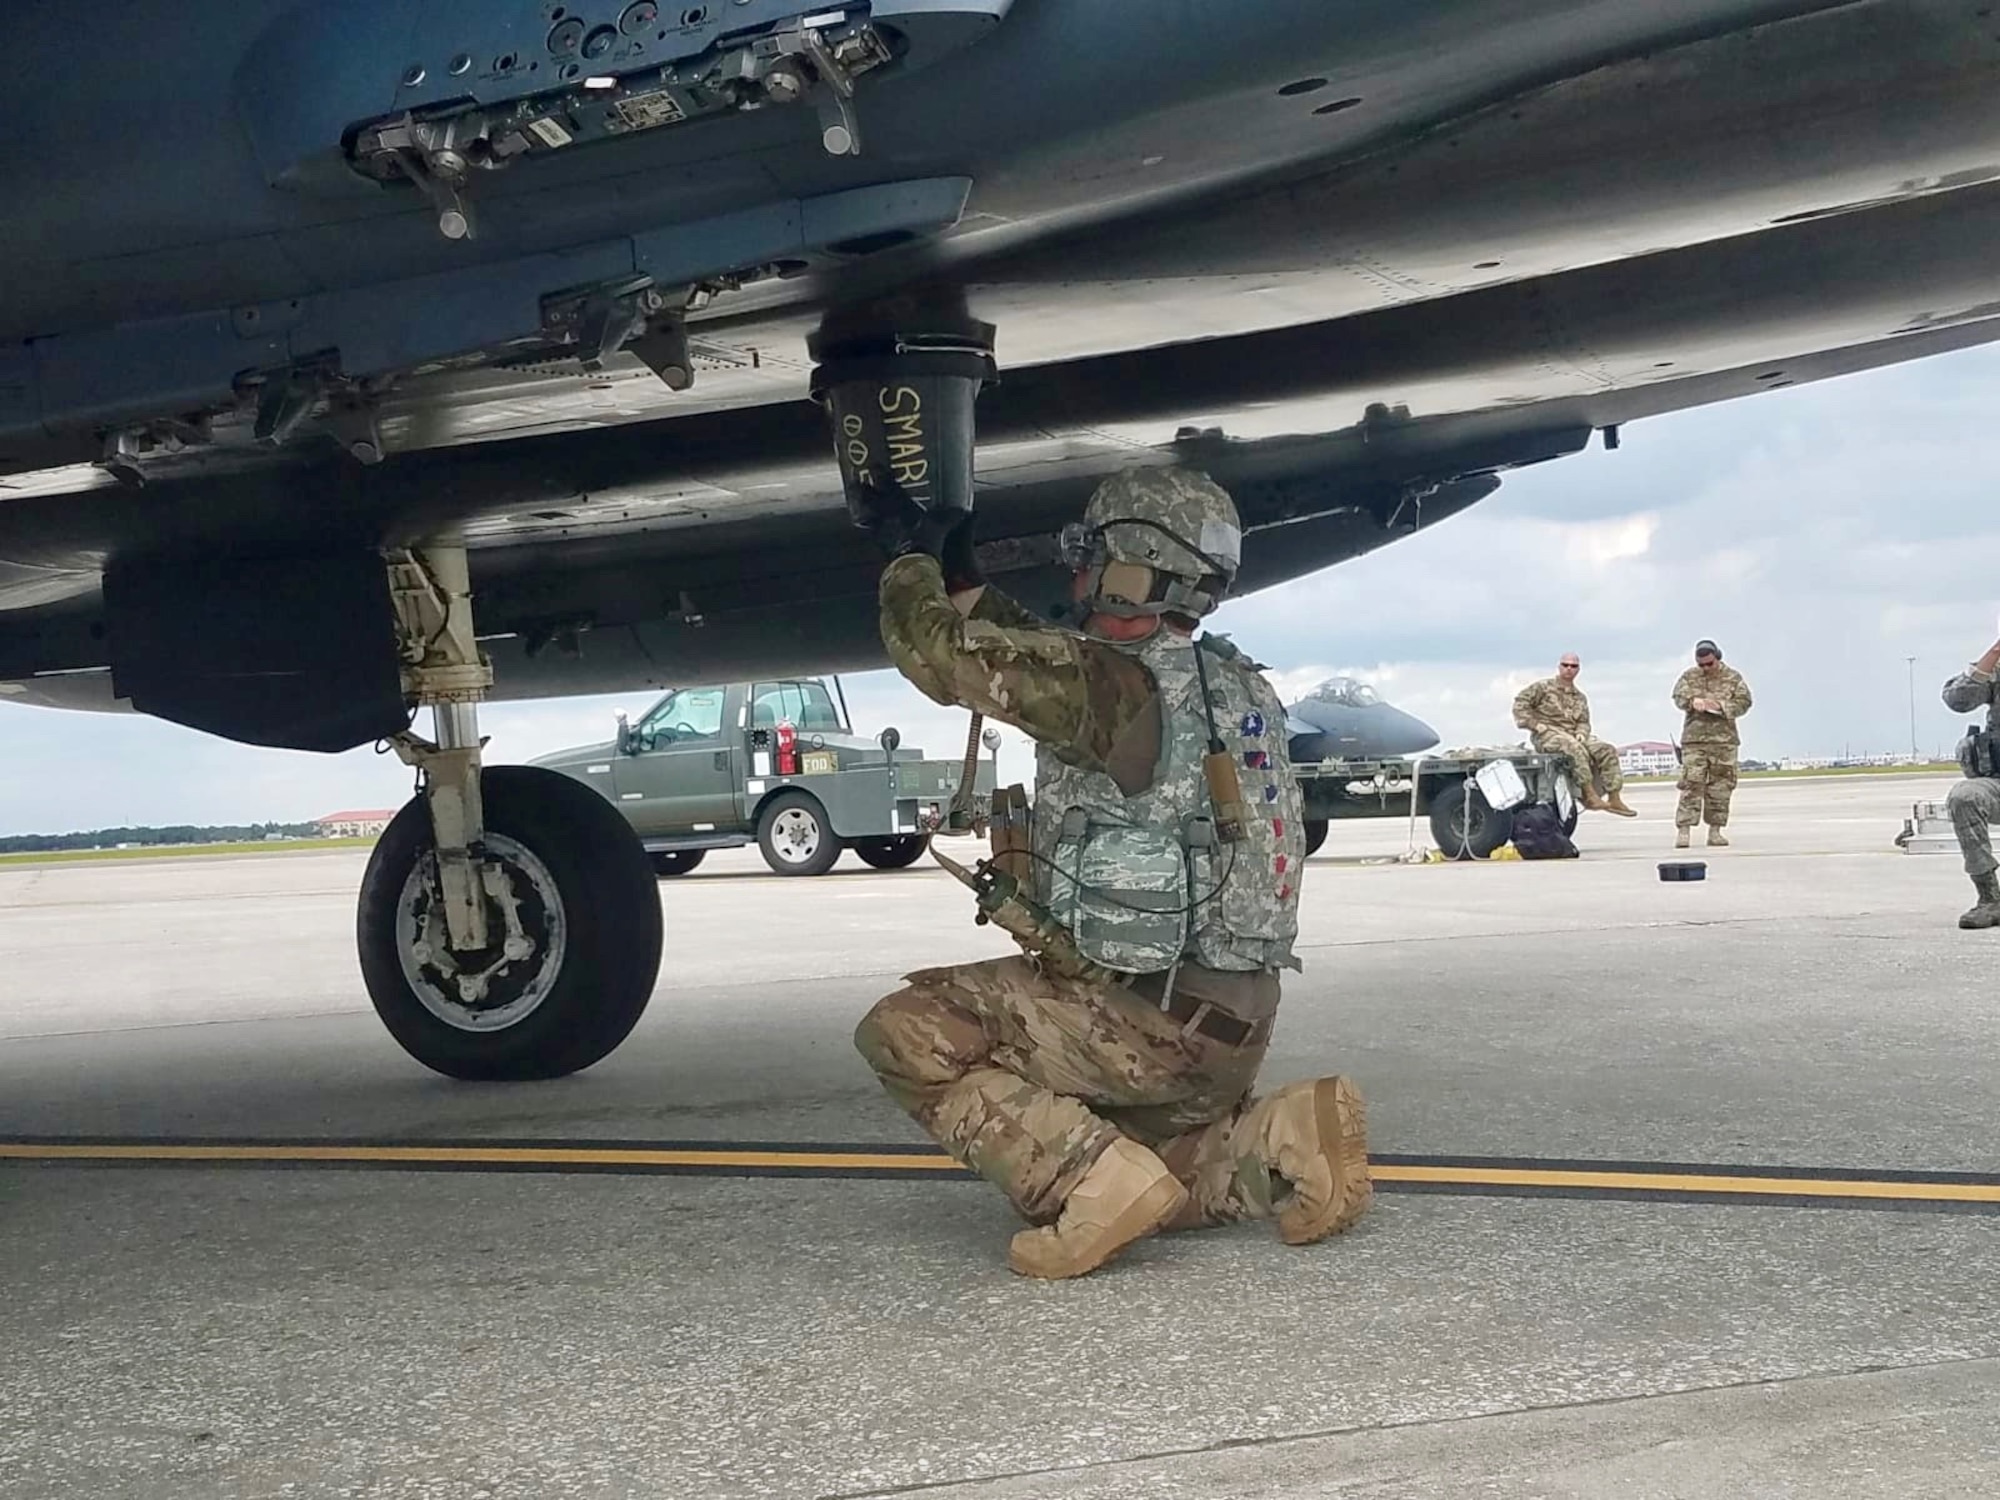 Tech. Sgt. Steven Wilson, 4th Logistics Readiness Squadron air transportation craftsman, performs hot-pit refueling of an F-15E during the Combat Support Wing capstone, May 9, 2019, at MacDill Air Force Base, Florida.